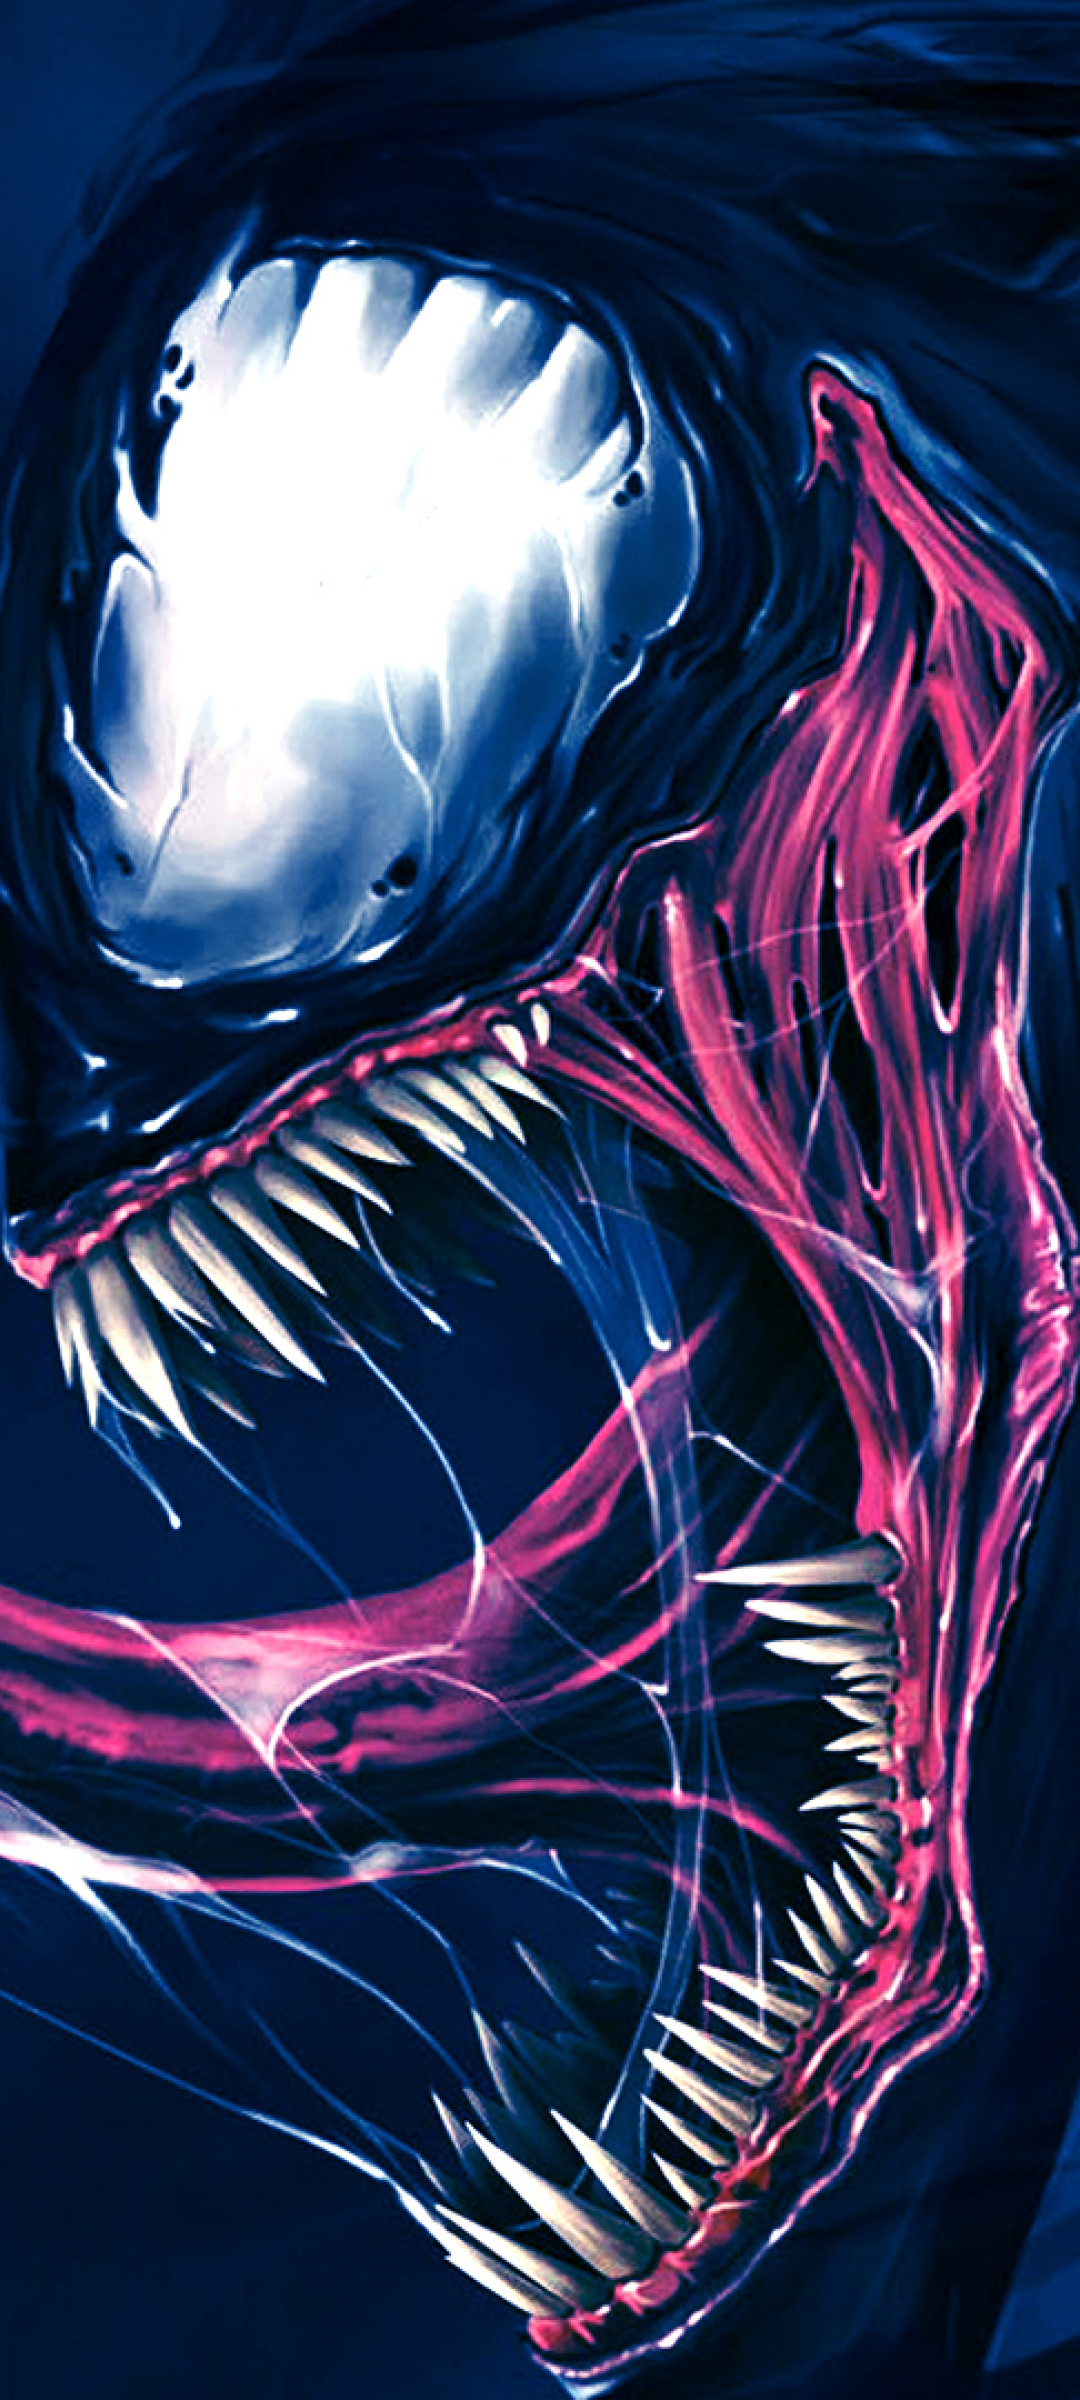 1080x2400 Artwork Venom 1080x2400 Resolution Wallpaper Hd Movies 4k Wallpapers Images Photos And Background Wallpapers Den